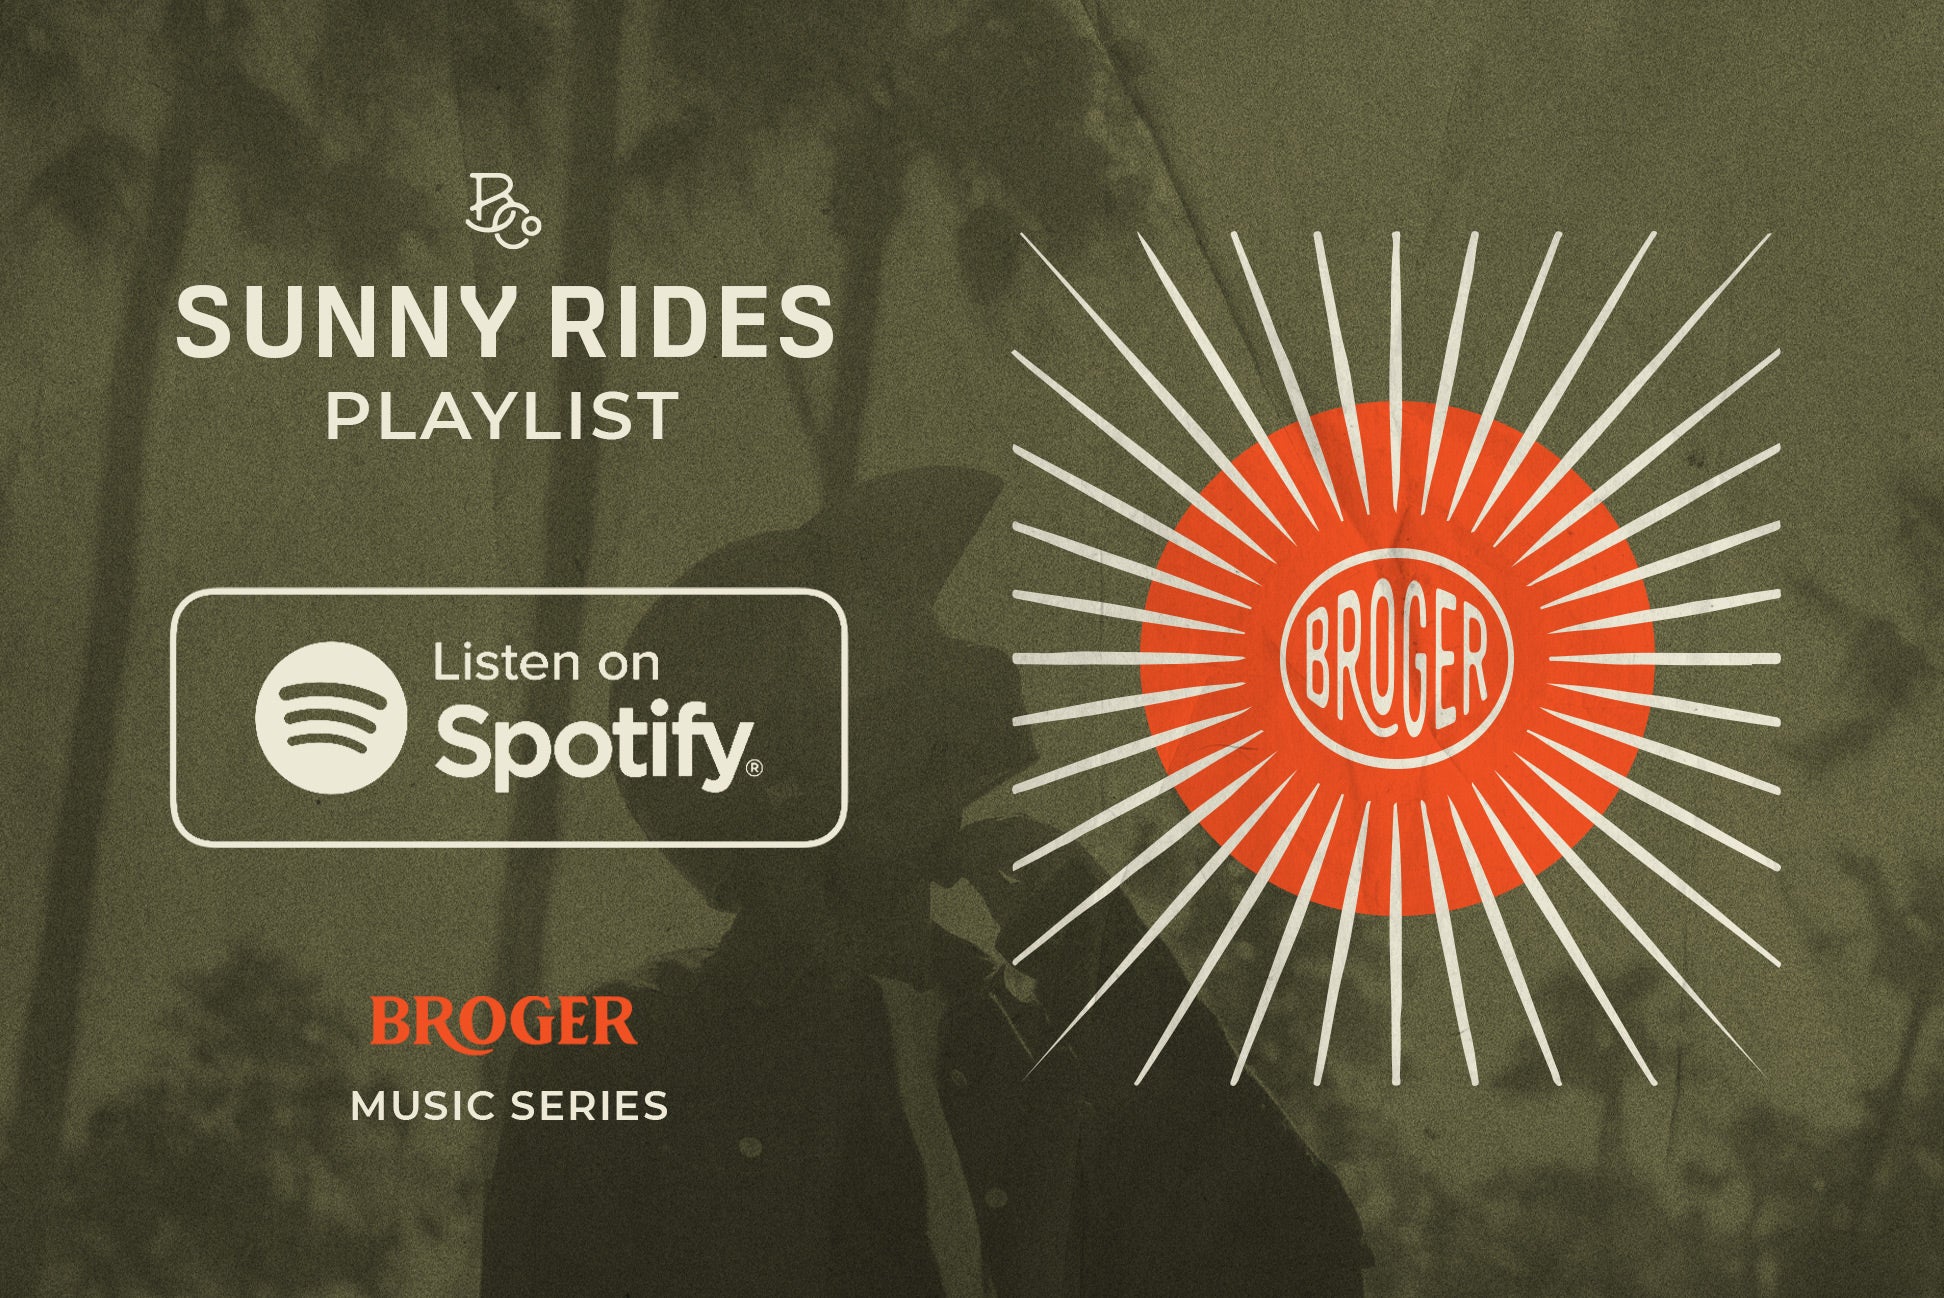 Cruisin' and Groovin': Broger's Summer Playlist for Road Trippers and Adventure Seekers